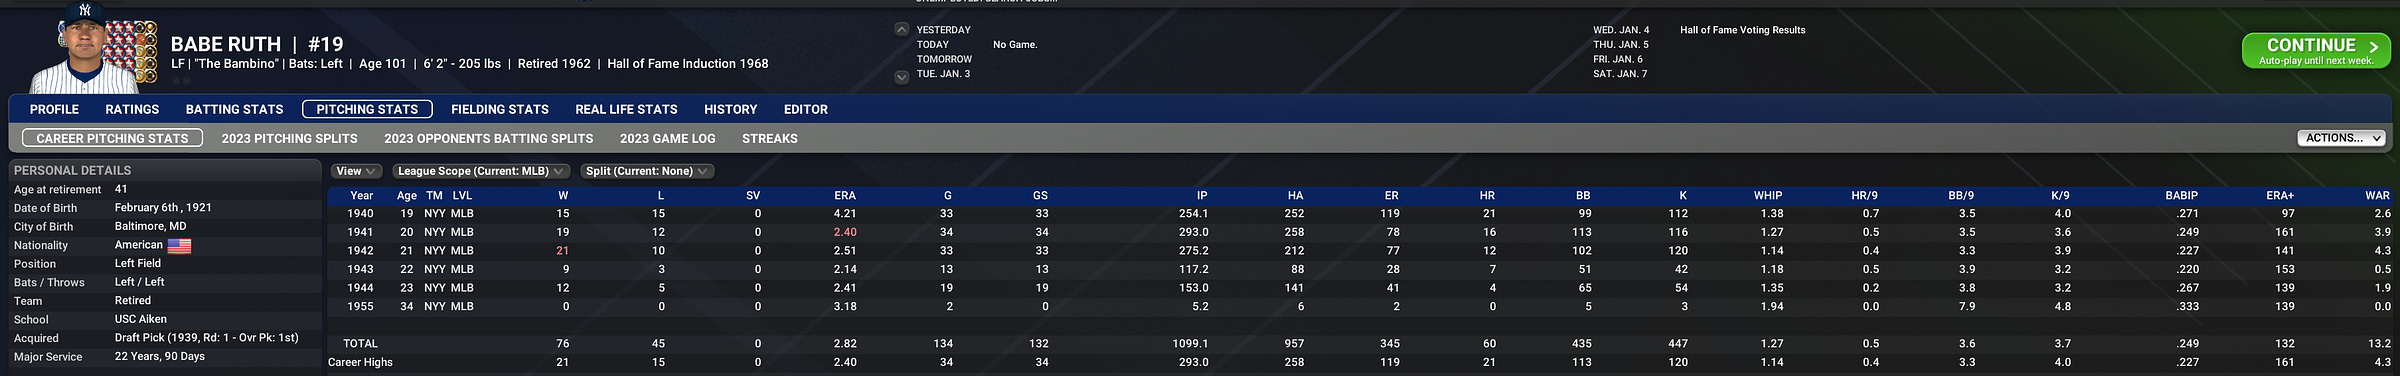 OOTP Babe Ruth